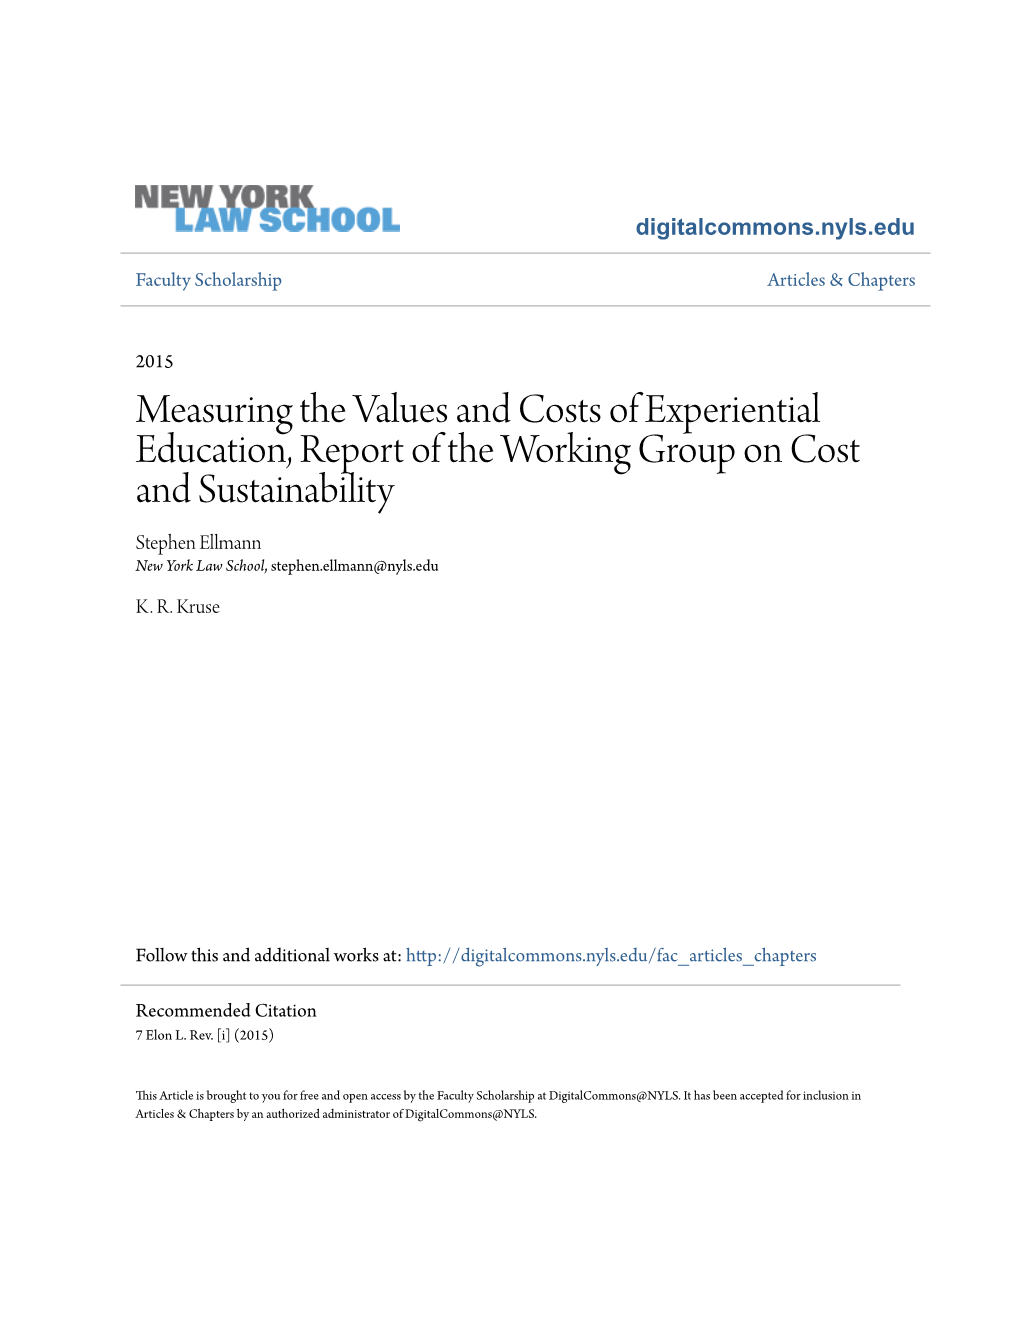 Measuring the Values and Costs of Experiential Education, Report Of